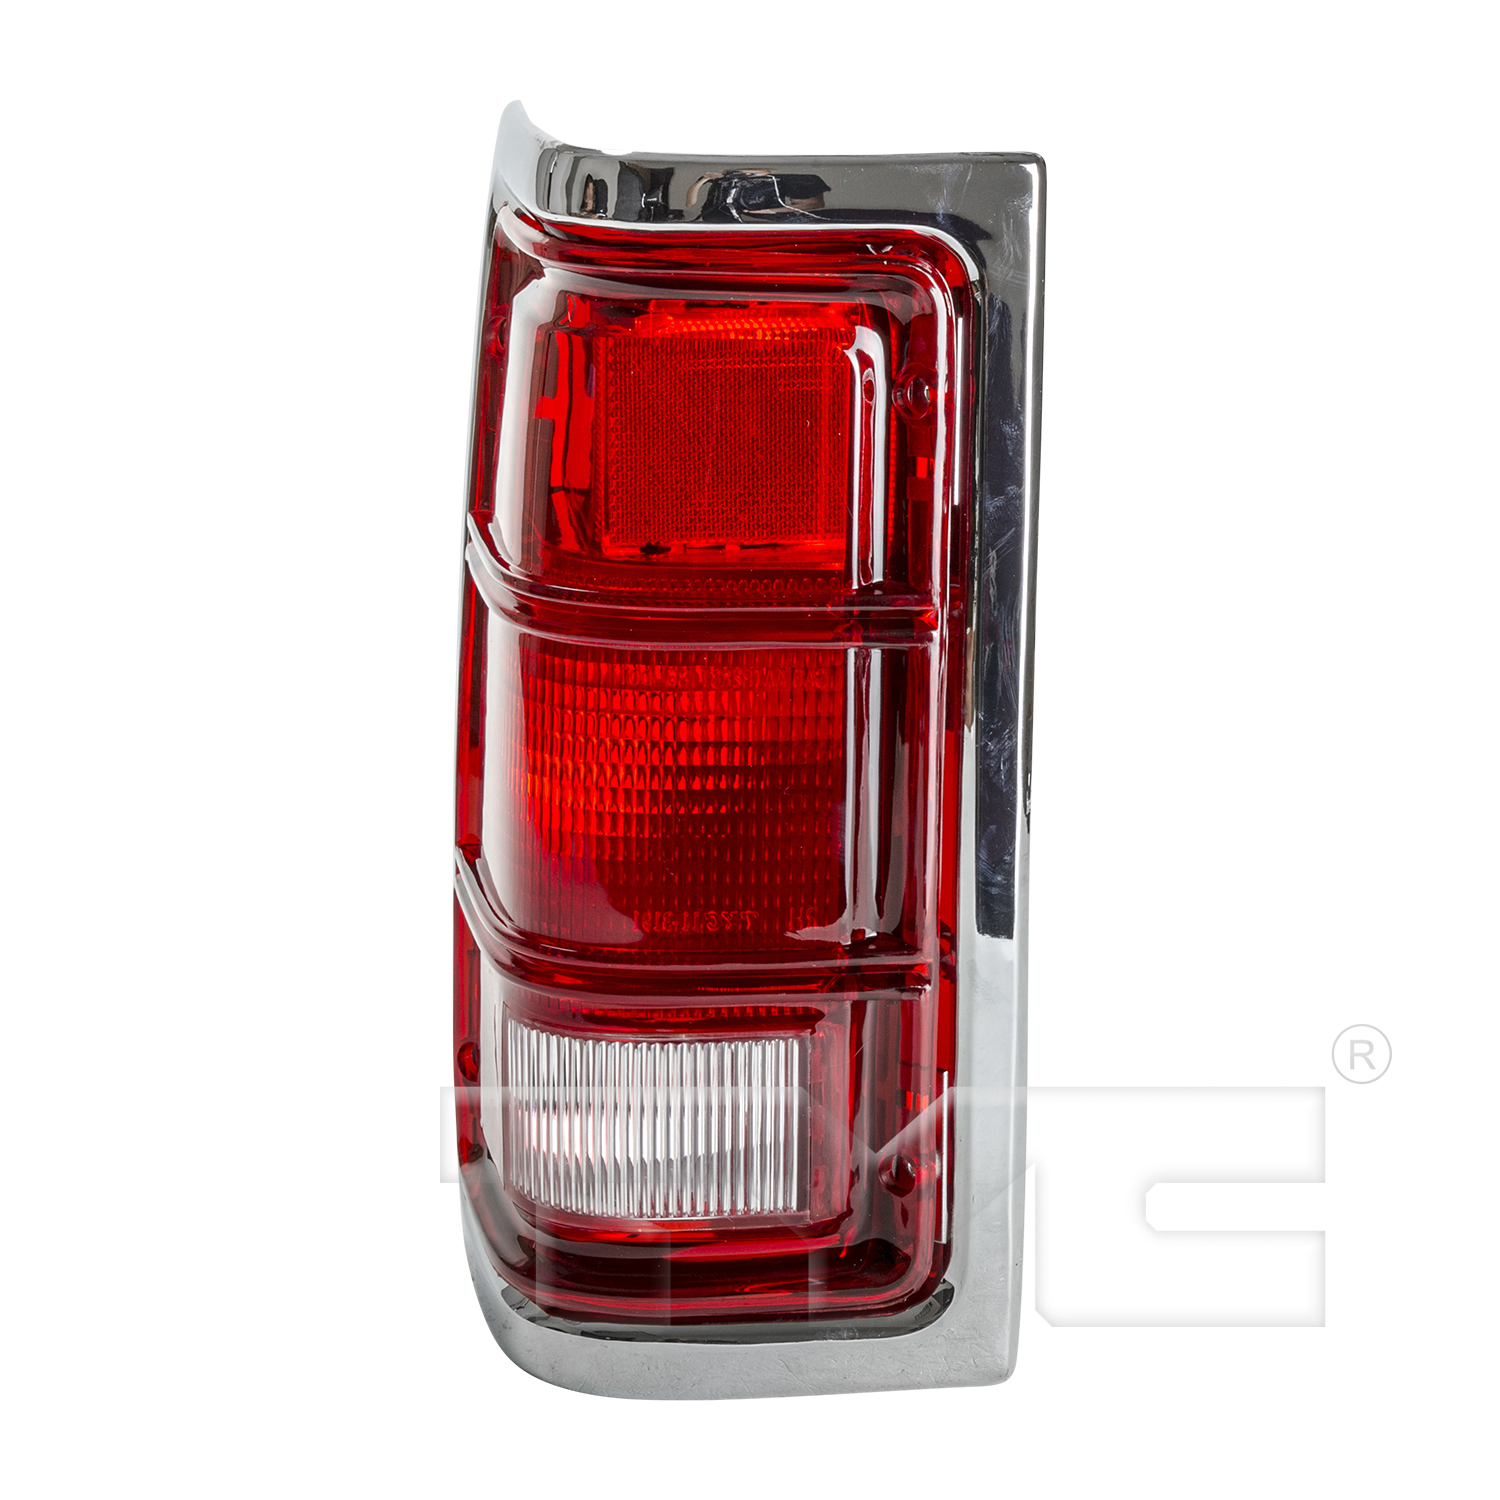 Aftermarket TAILLIGHTS for DODGE - W350, W350,87-91,LT Taillamp lens